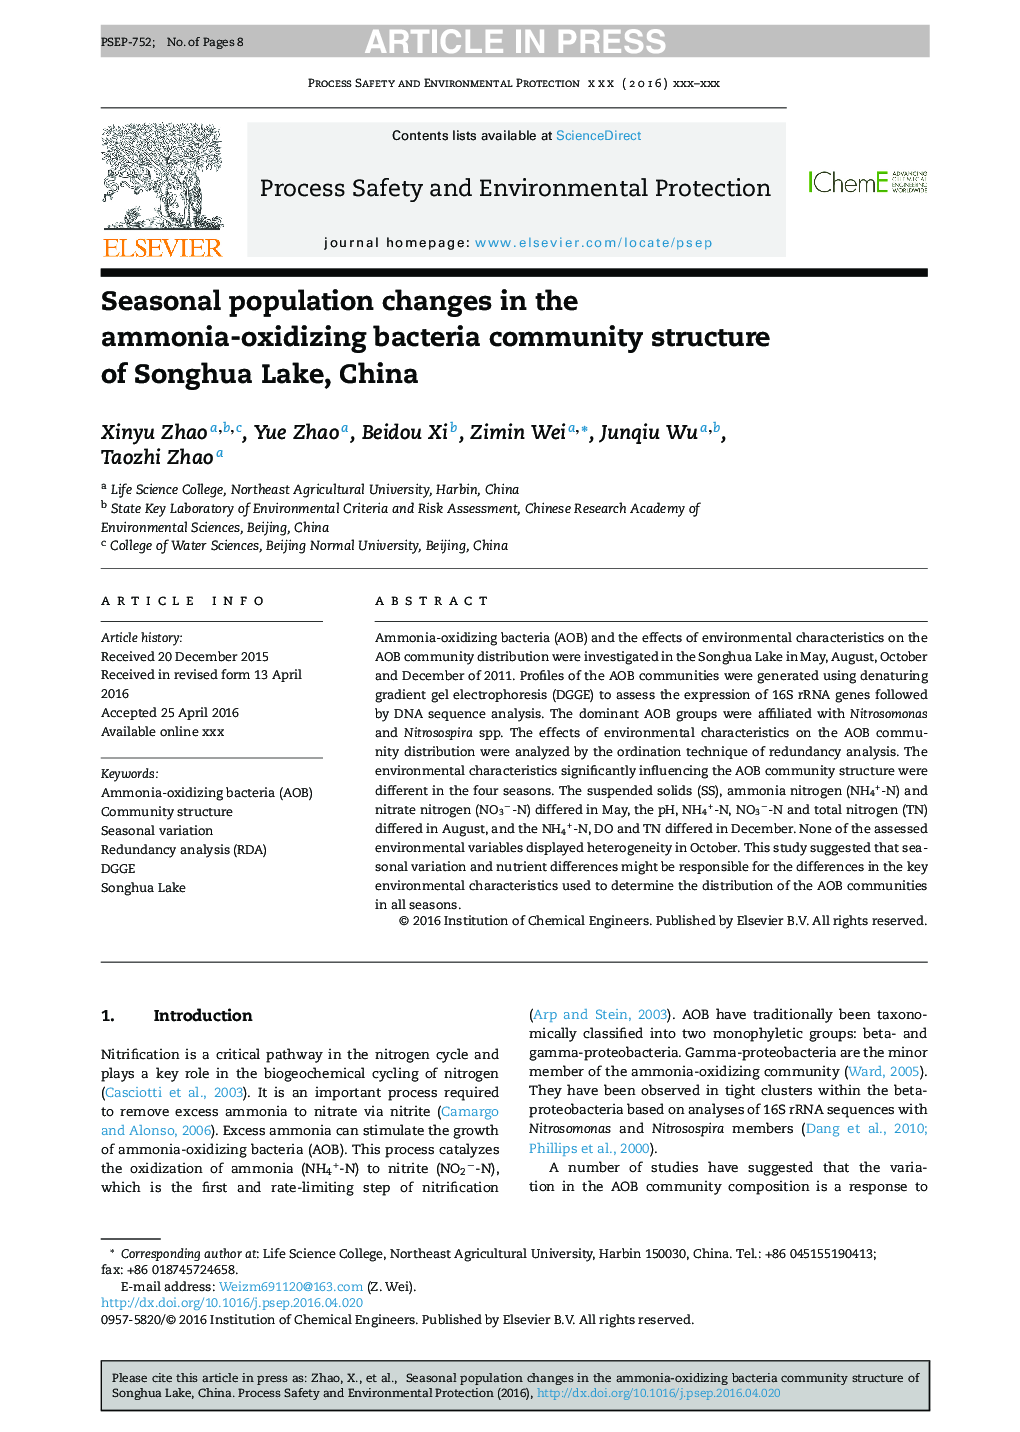 Seasonal population changes in the ammonia-oxidizing bacteria community structure of Songhua Lake, China